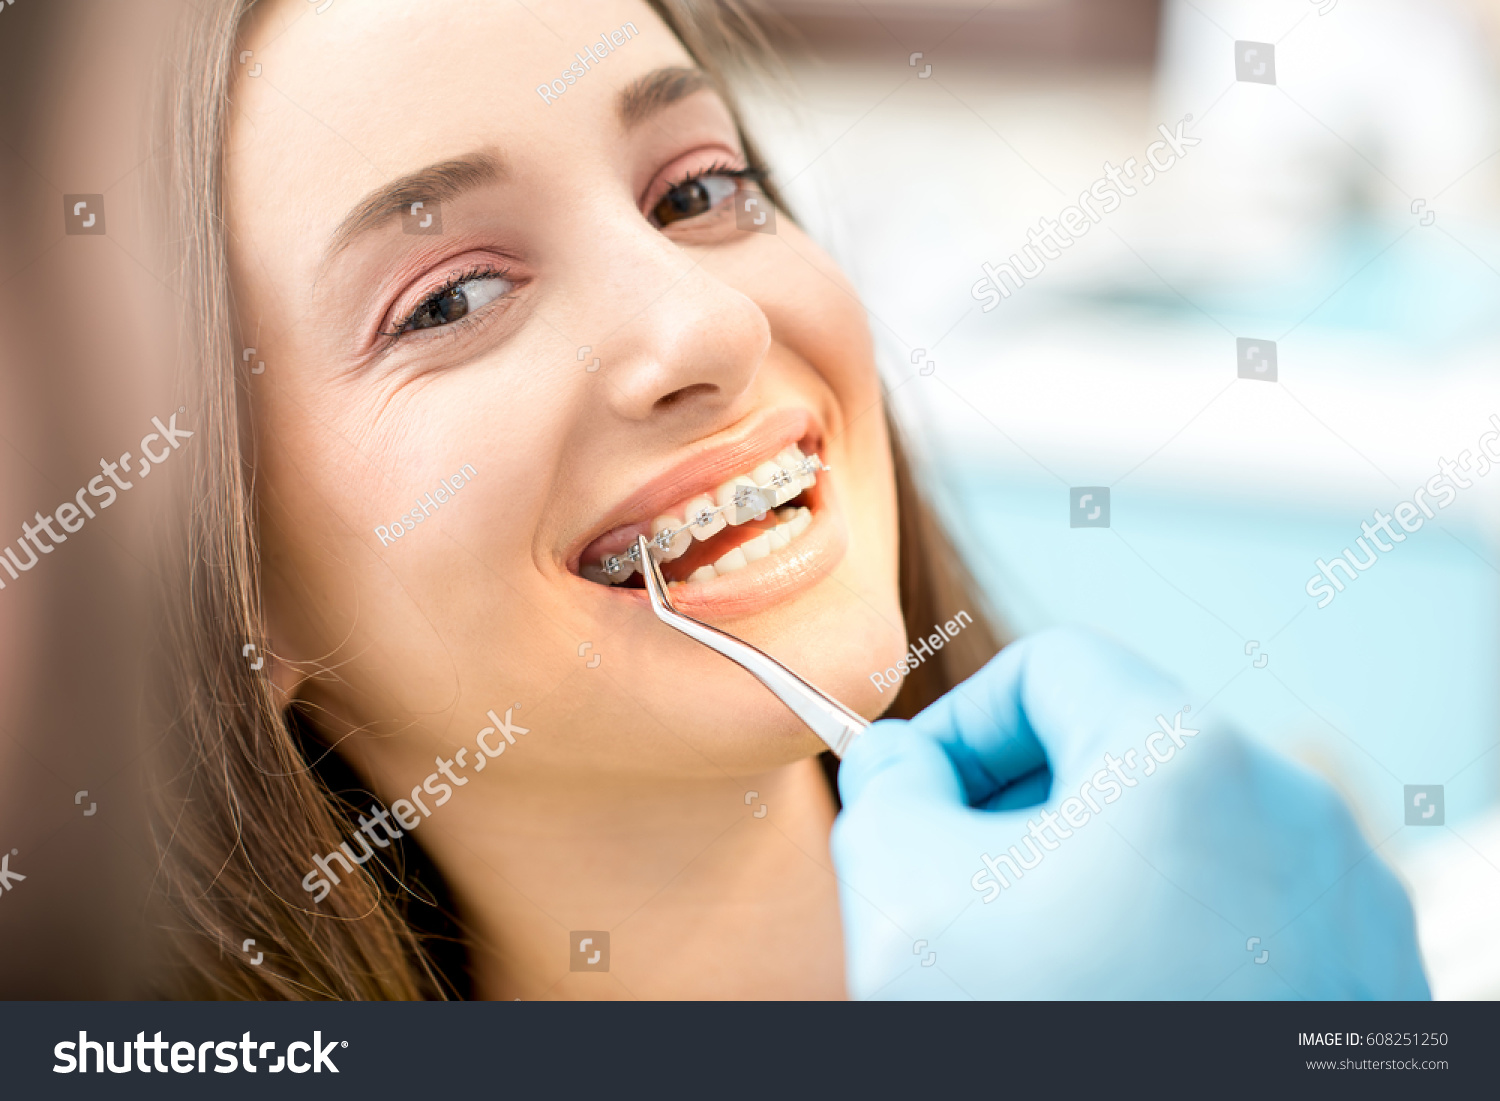 Putting dental braces to the woman's teeth at the dental office #608251250